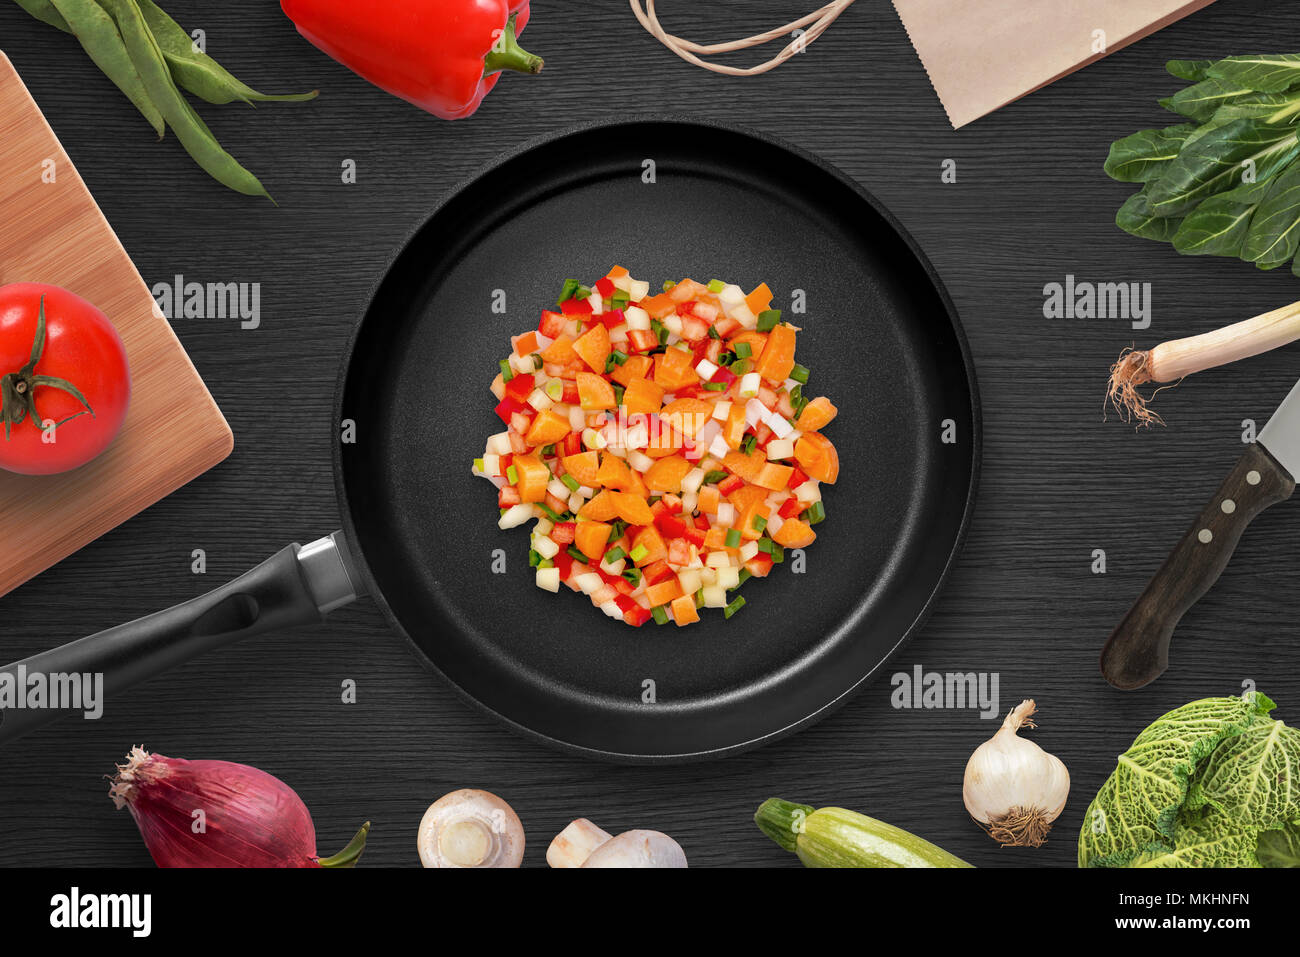 Frying pieces of vegetables in a pan. Preparing ingredients for head dish. Vegetarian cuisine. Top view. Stock Photo